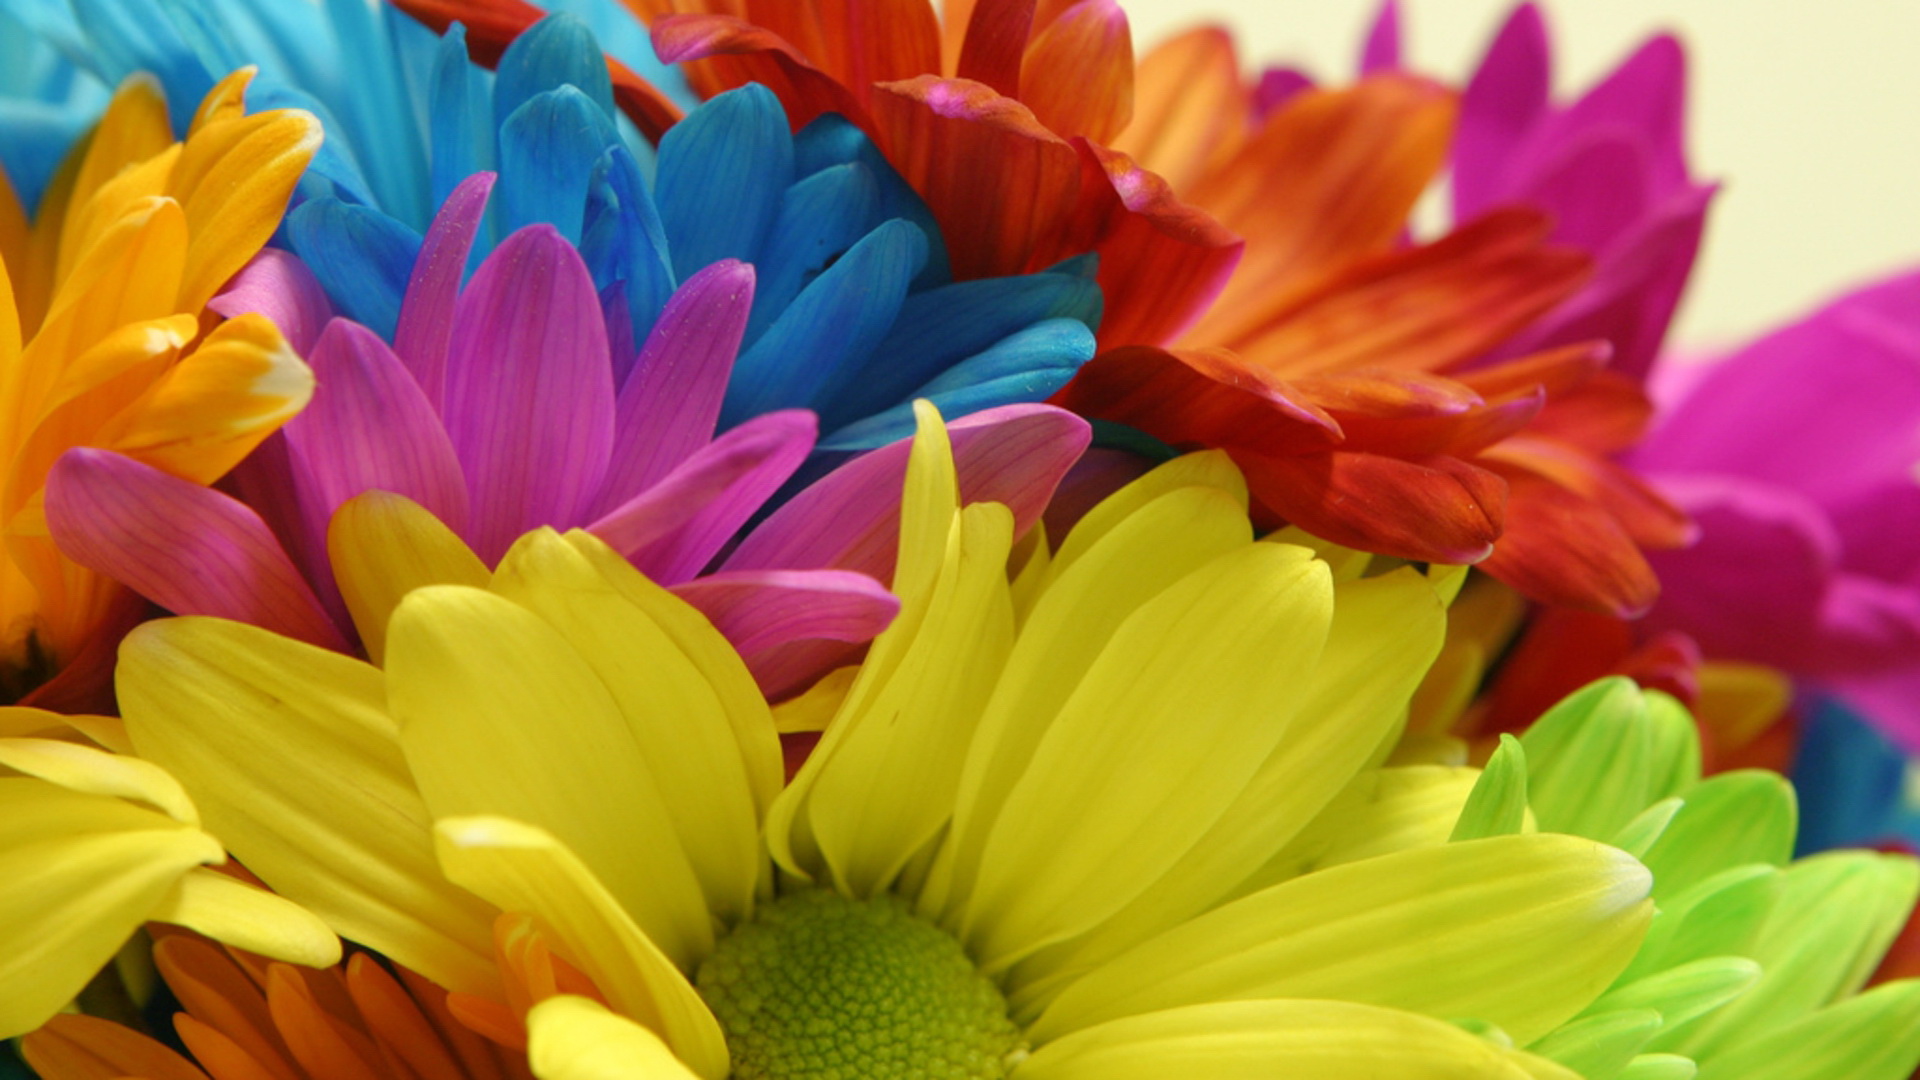 colorful flowers wallpaper,flower,petal,yellow,plant,close up